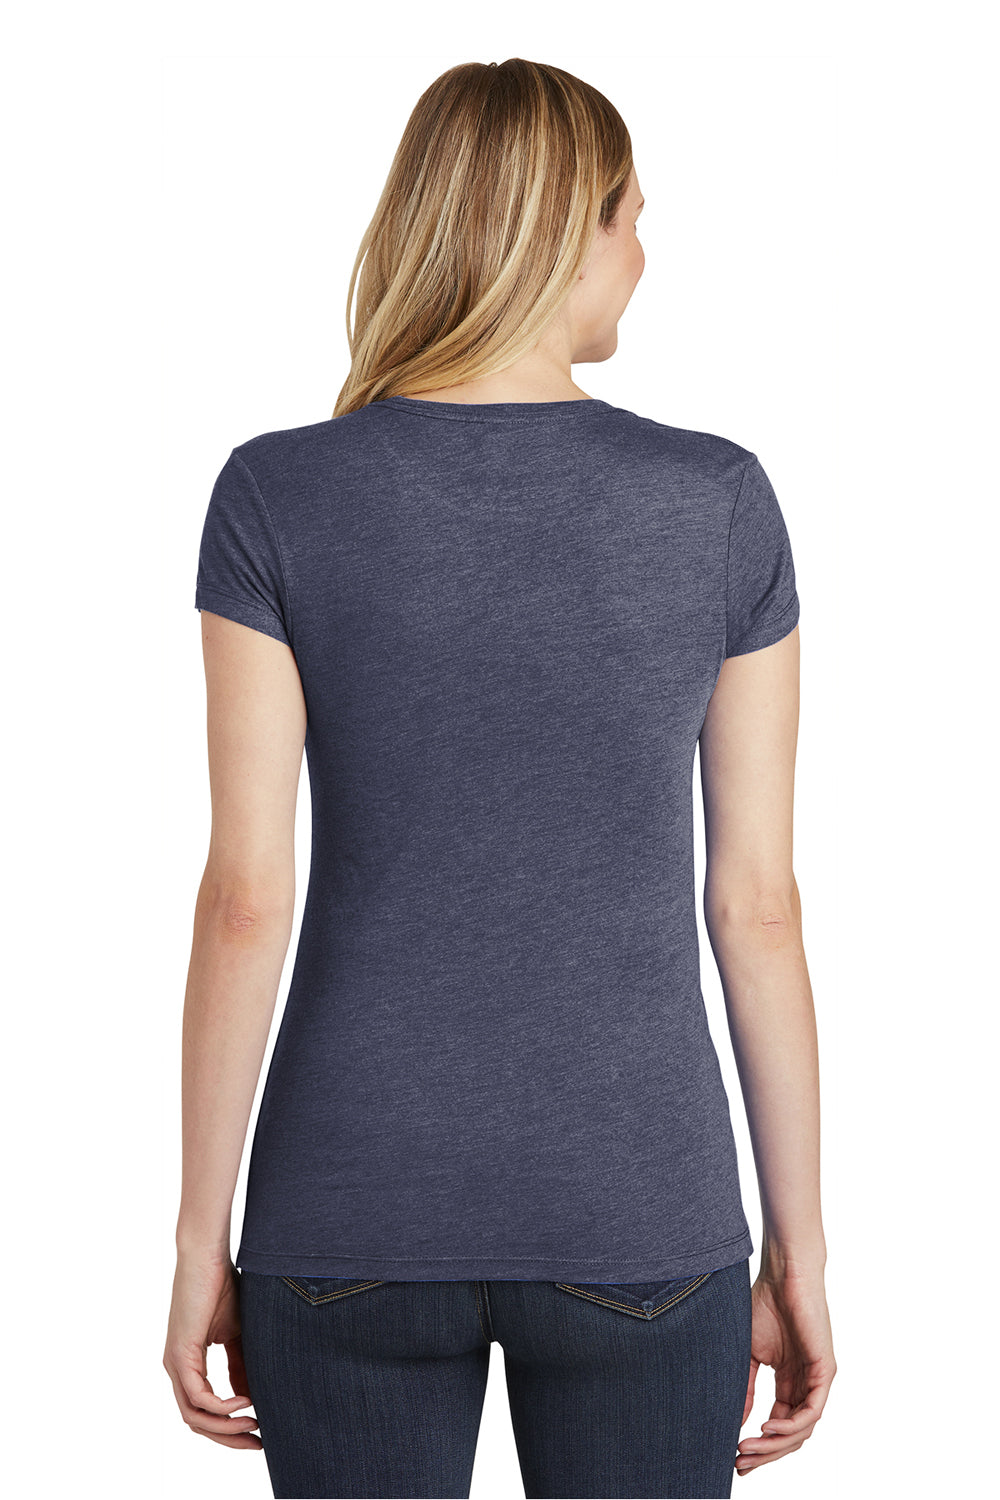 District DT155 Womens Fitted Perfect Tri Short Sleeve Crewneck T-Shirt Navy Blue Back